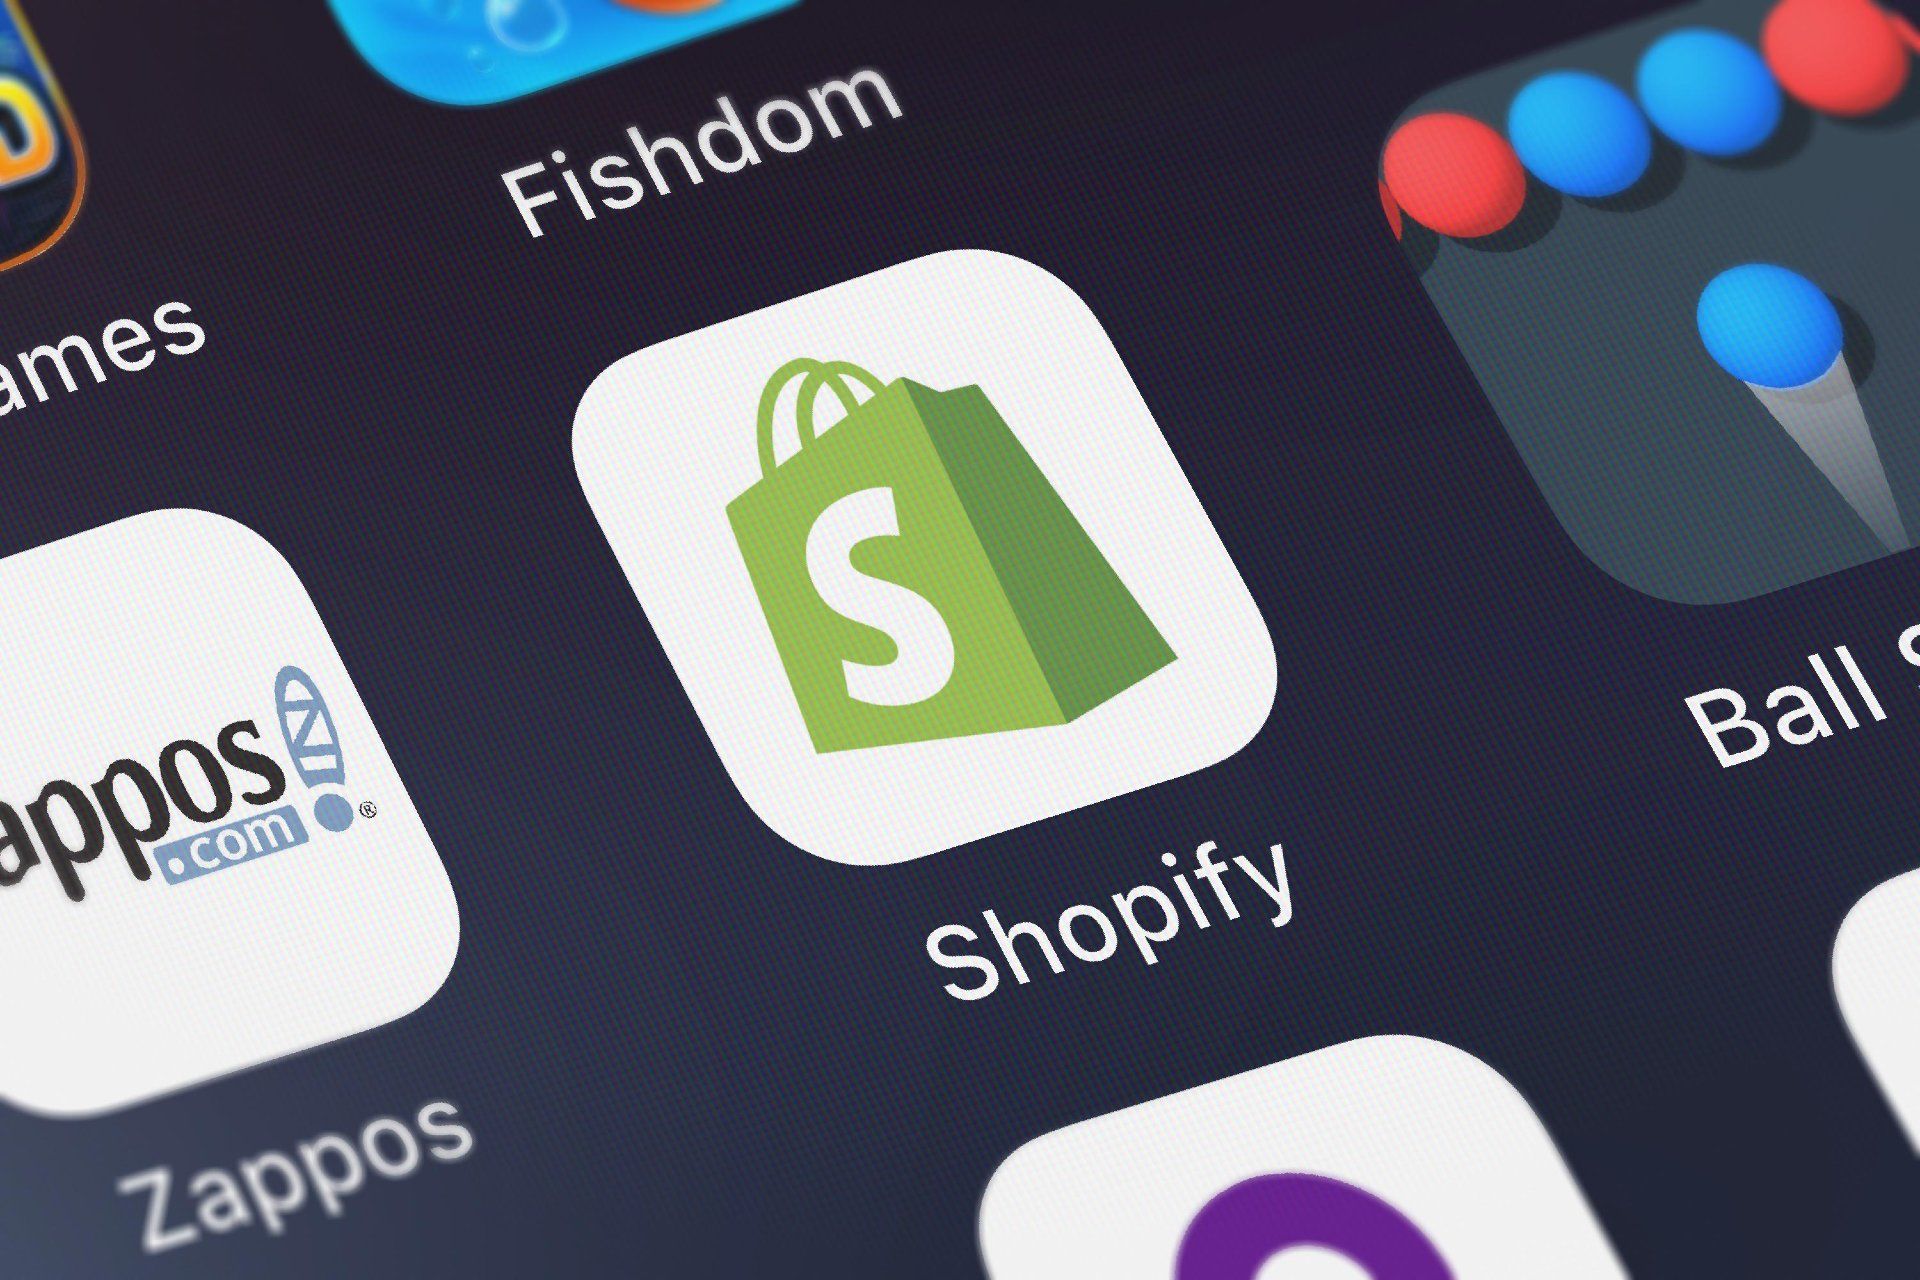 The Shopify app is seen on a phone or tablet screen - data breach